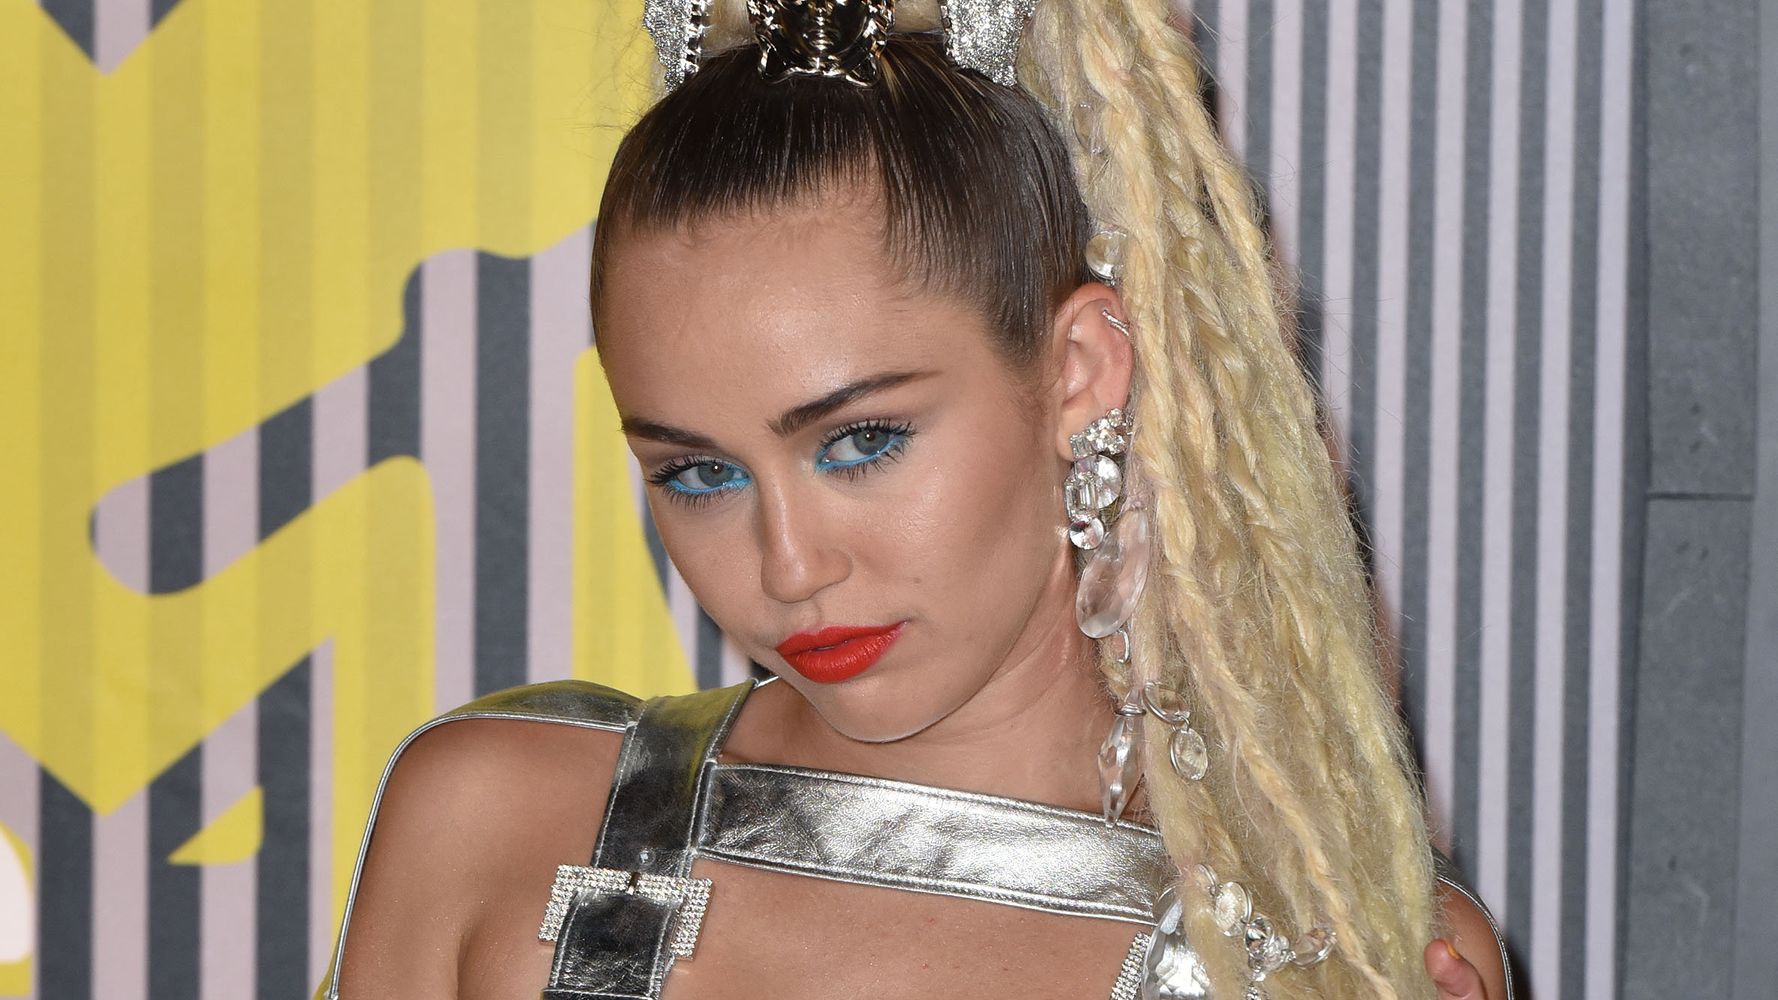 Mylie Cyrus Lesbian - You've Probably Never Heard Lesbian Sex Described The Way Miley Is  Describing It | HuffPost Voices